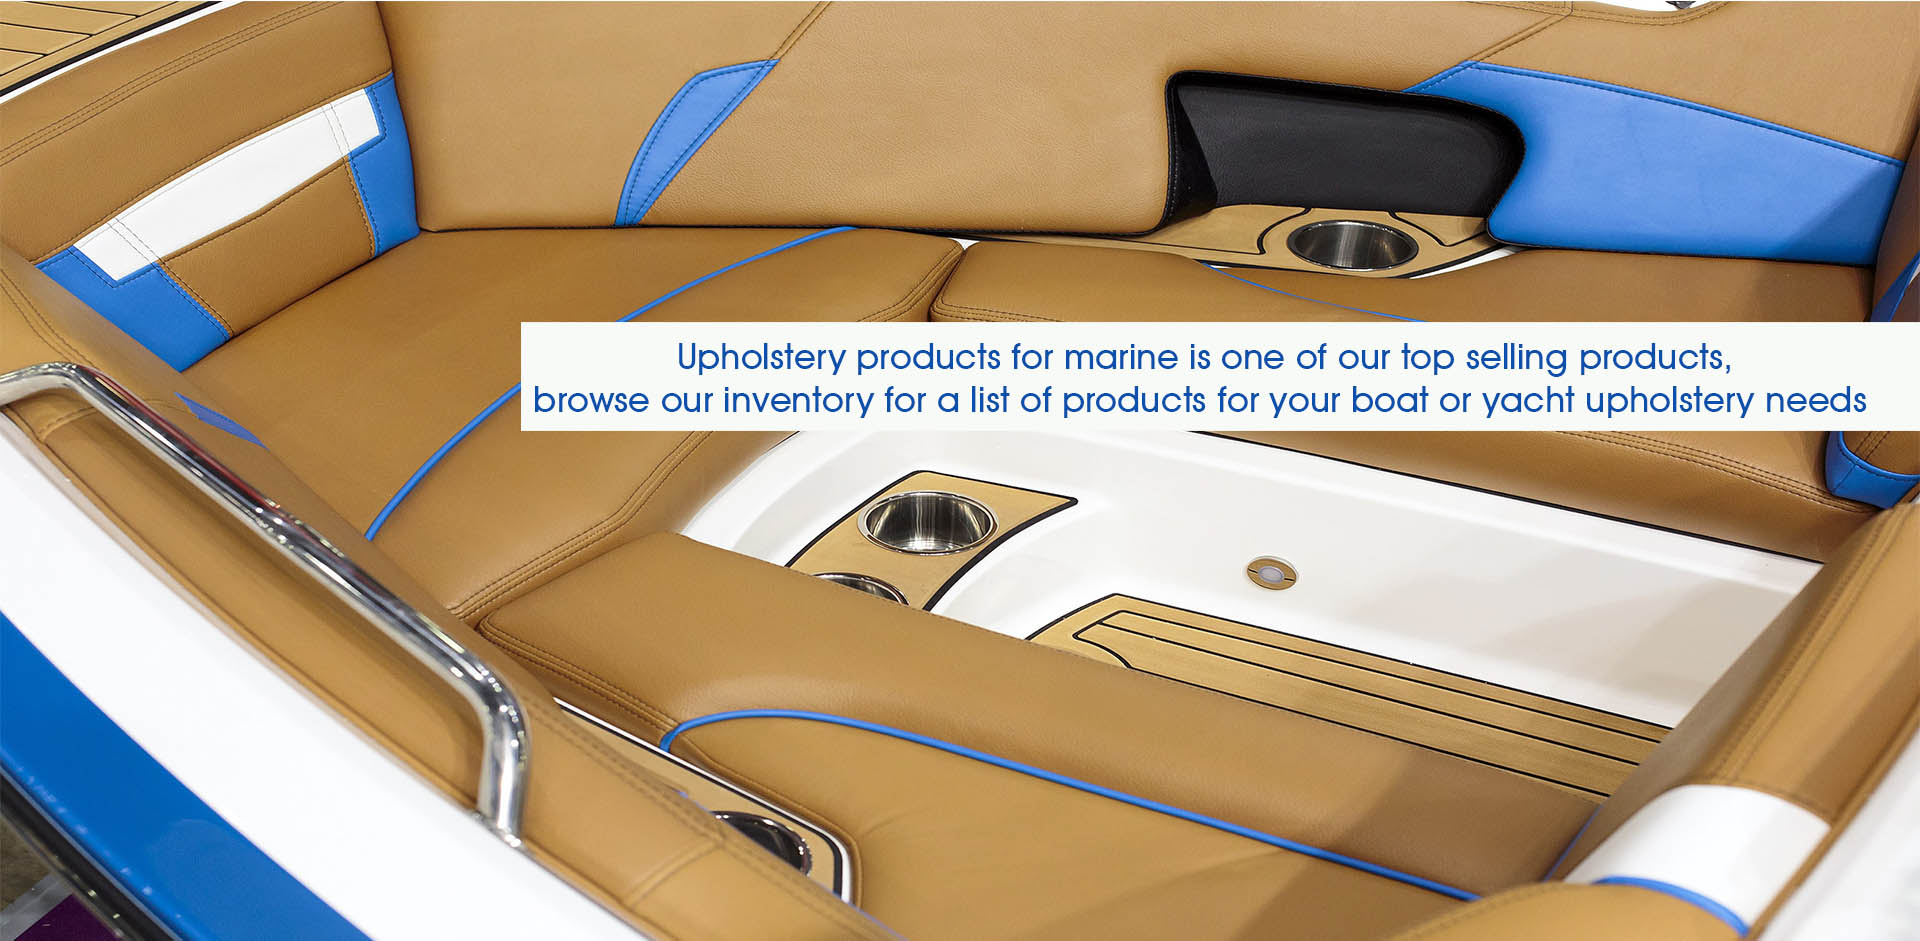 Marine upholstery solutions